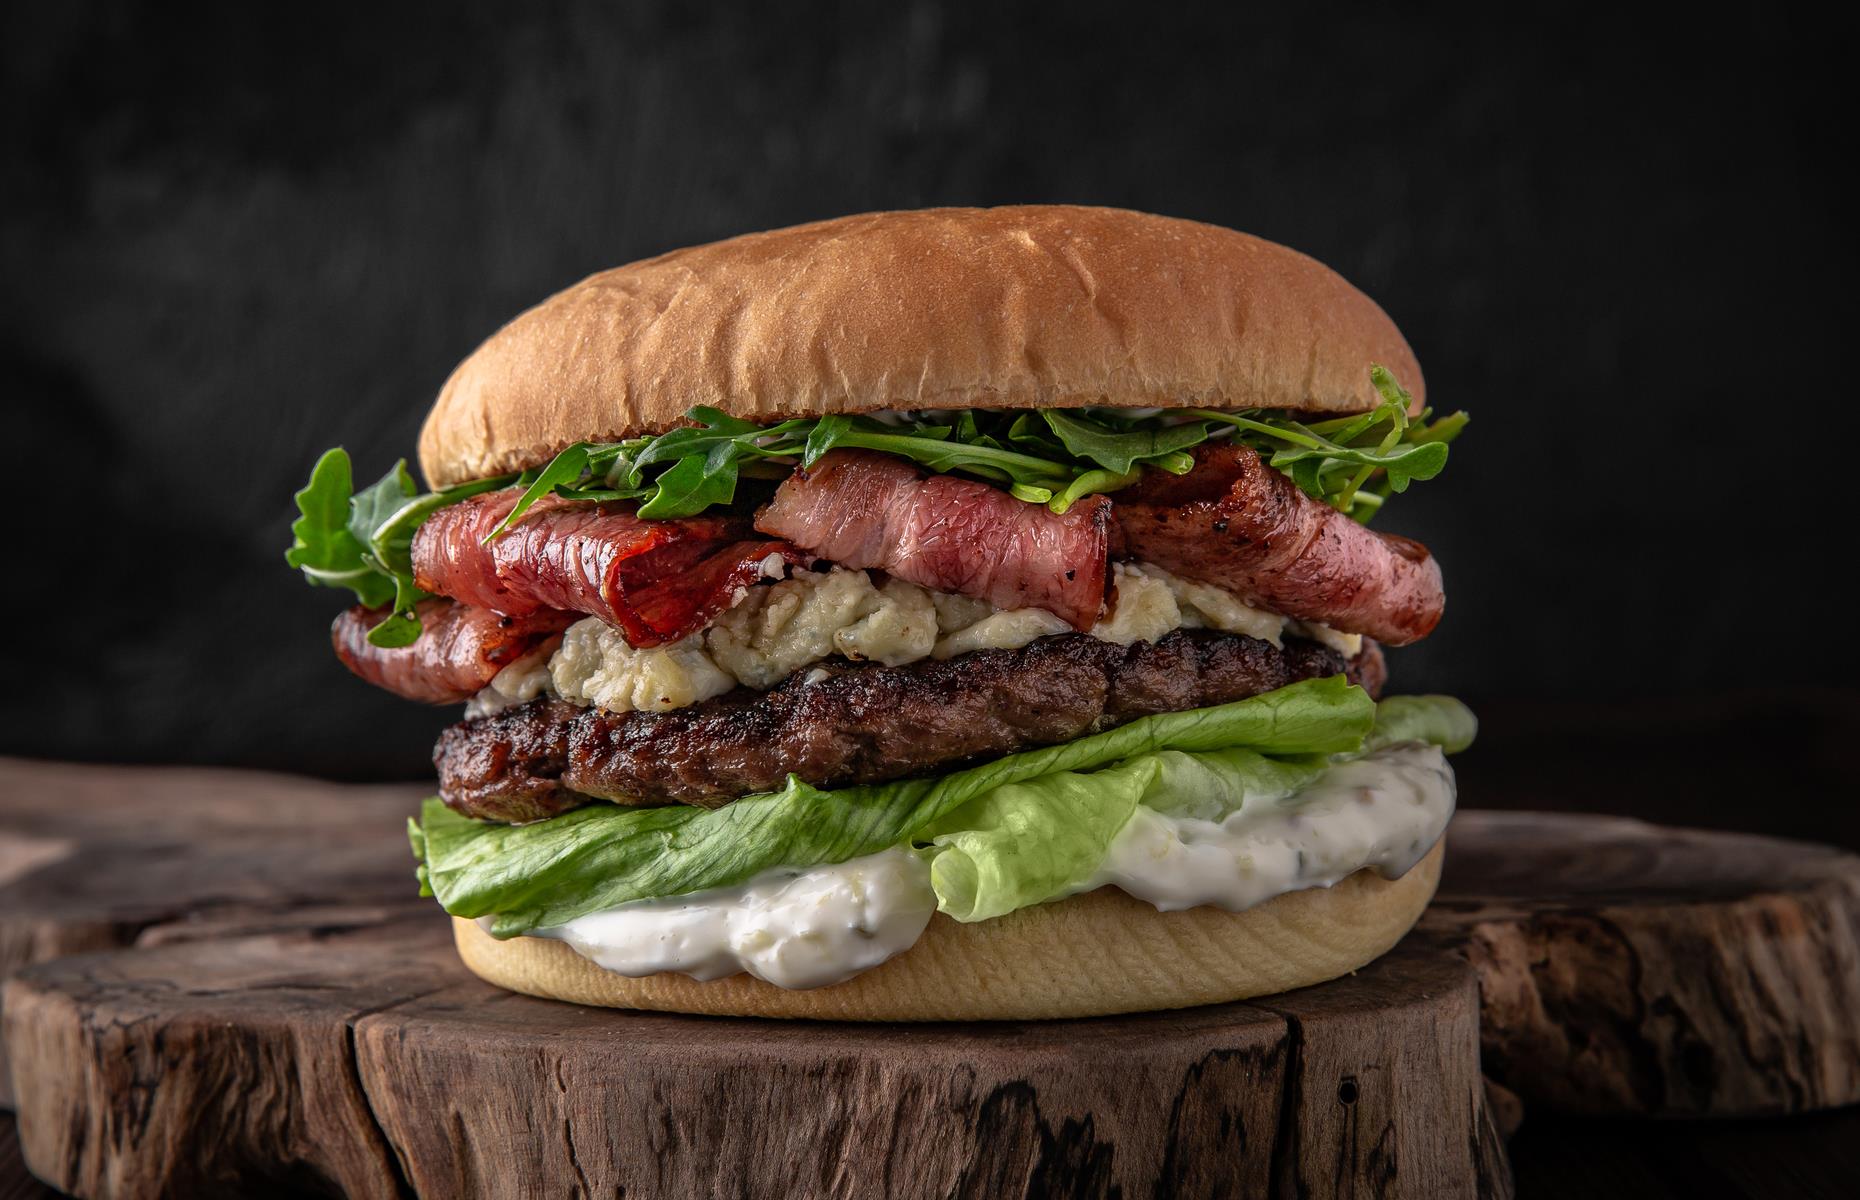 Make the perfect burger with these top tips